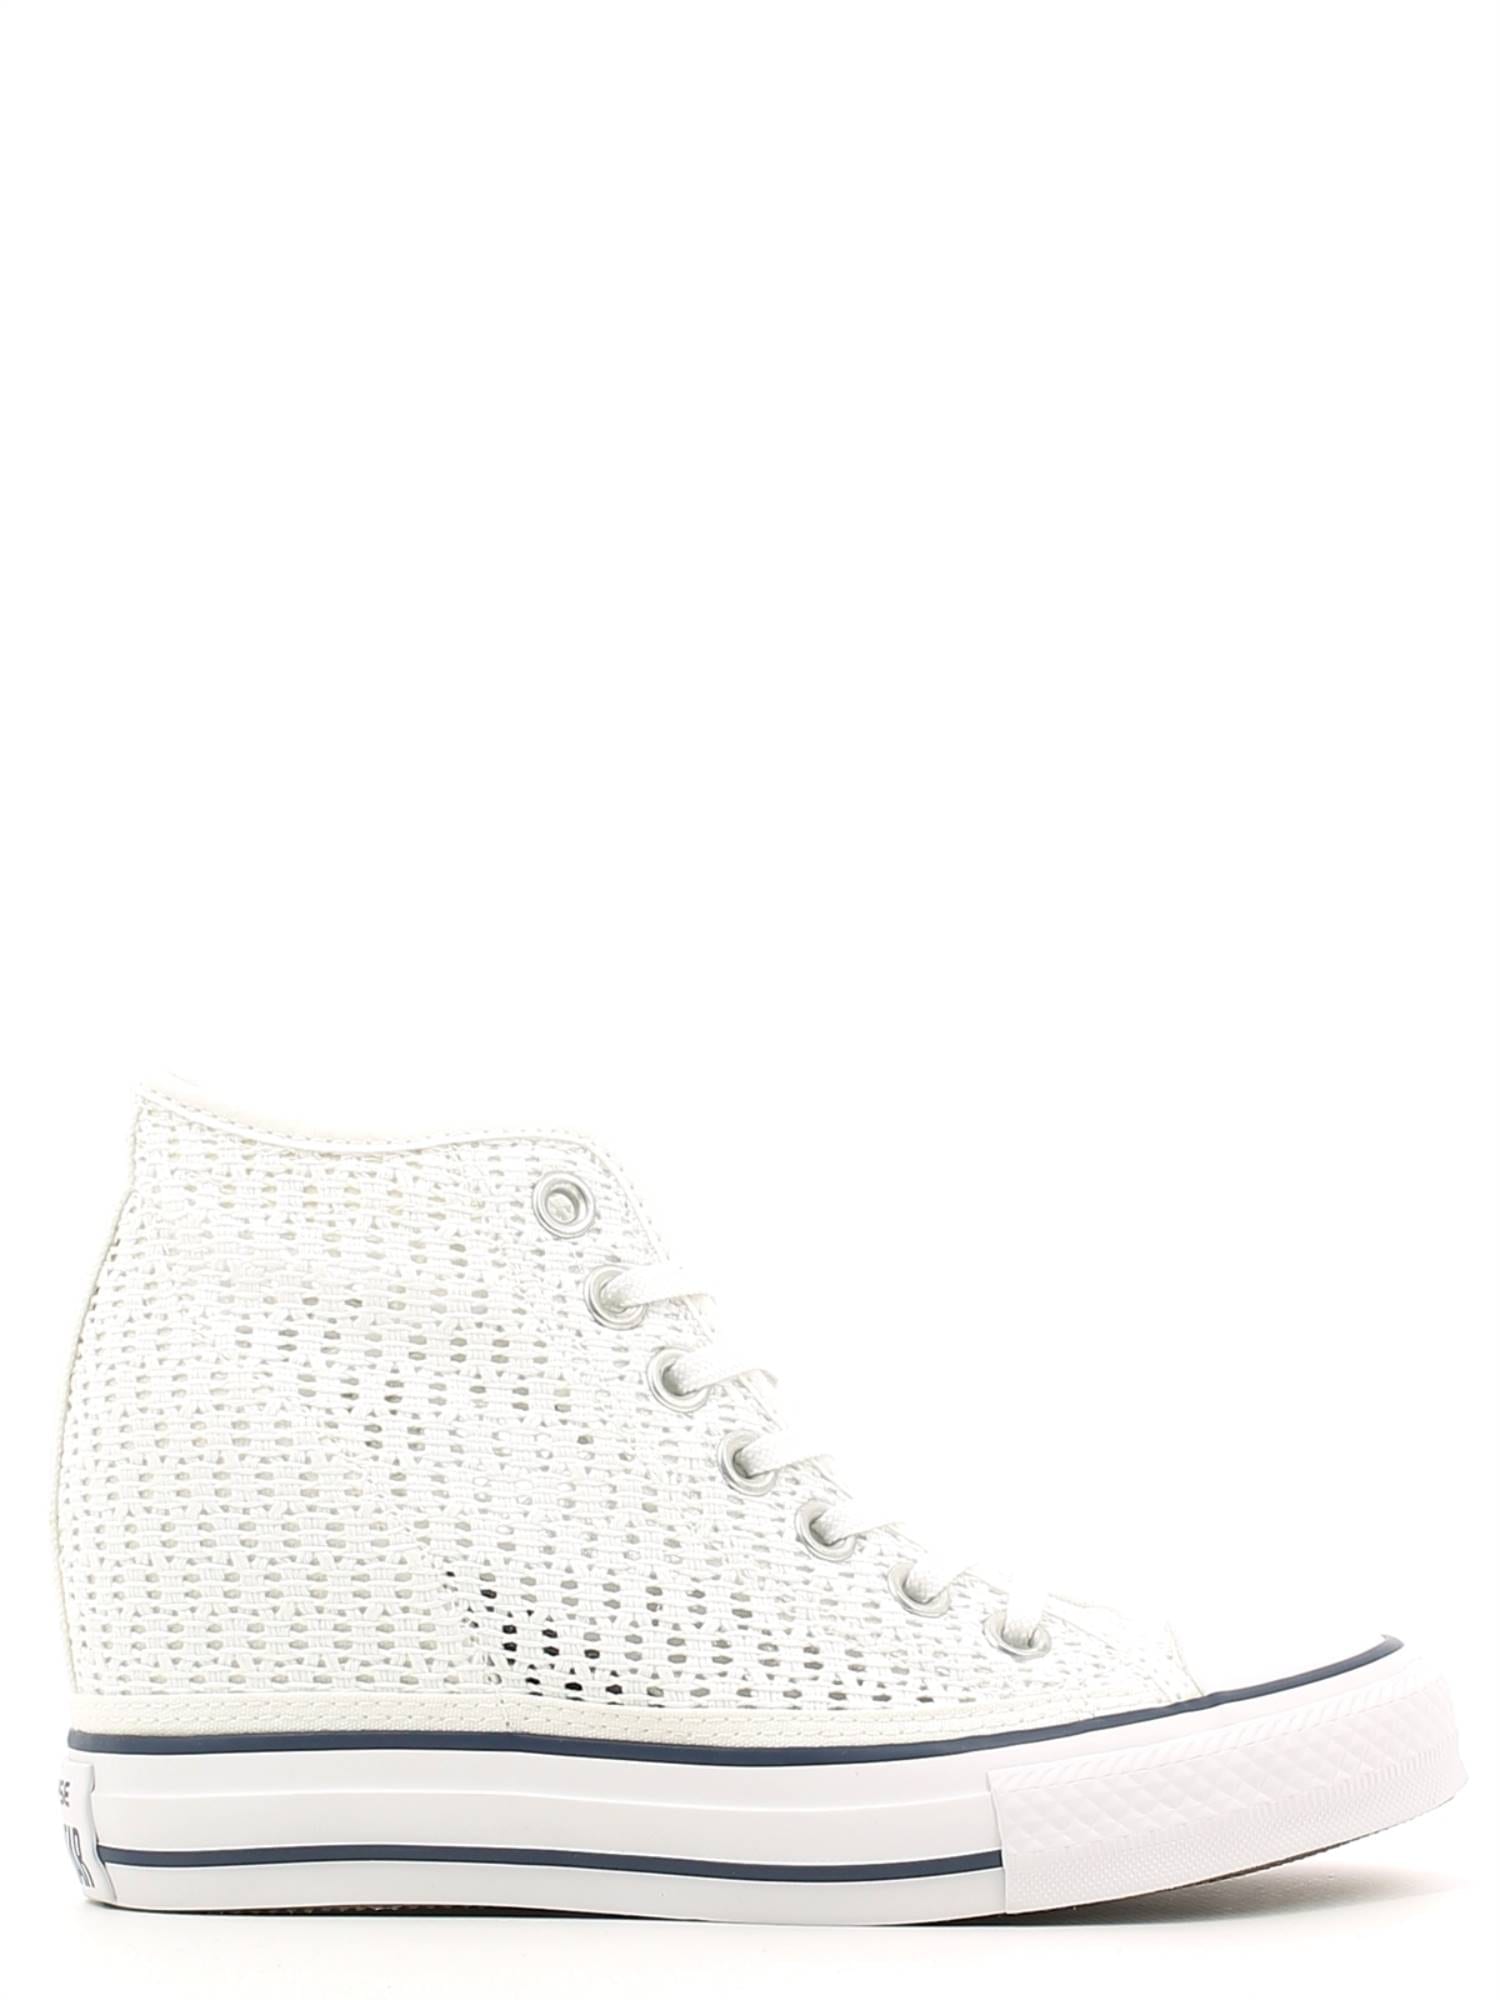 converse lux mid